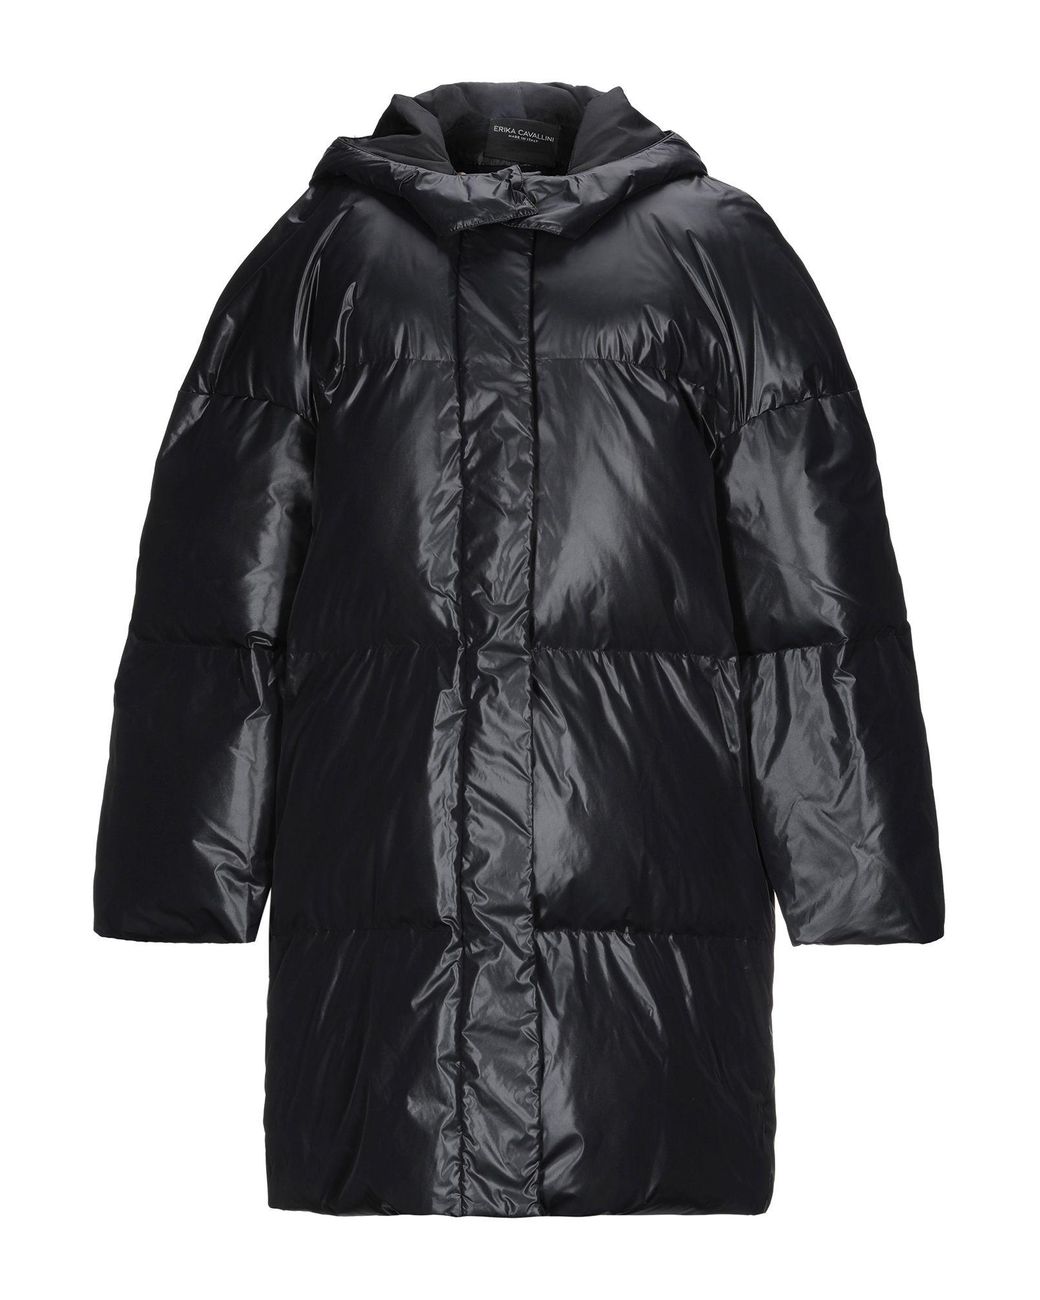 Erika Cavallini Semi Couture Synthetic Down Jacket in Black - Lyst